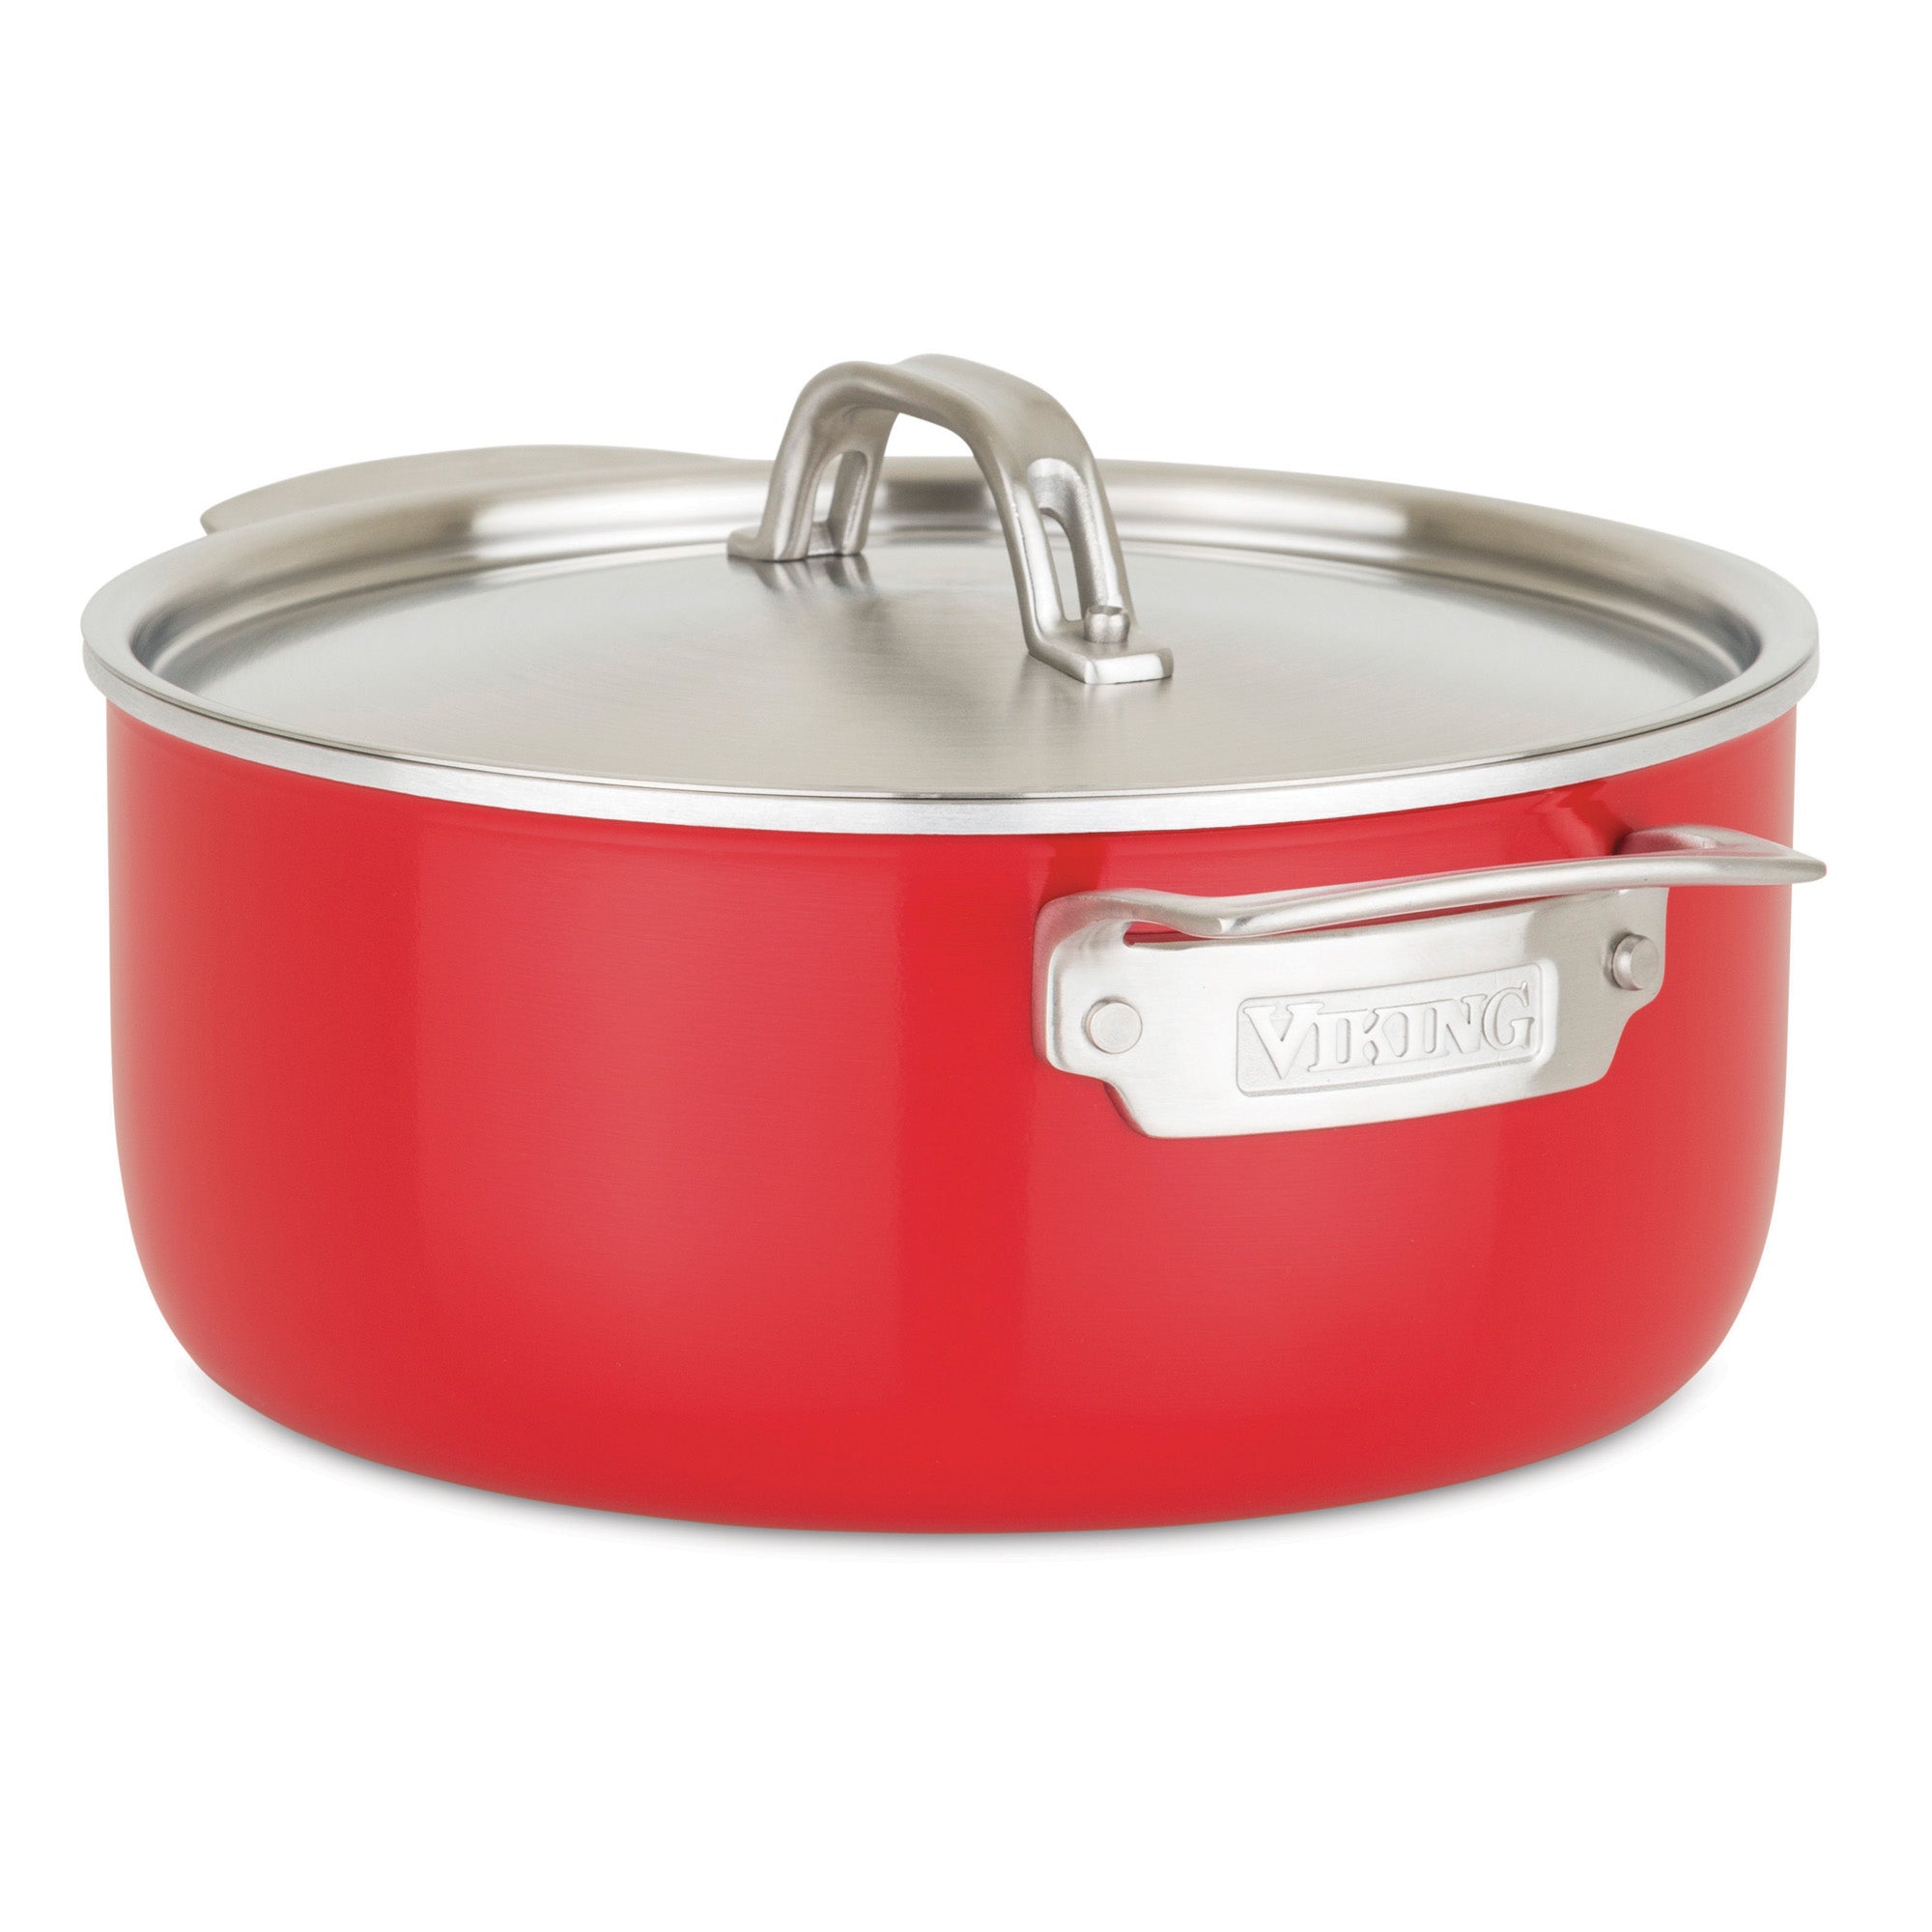 Viking Multi-Ply 2-Ply 11-Piece Red Cookware Set – Domaci